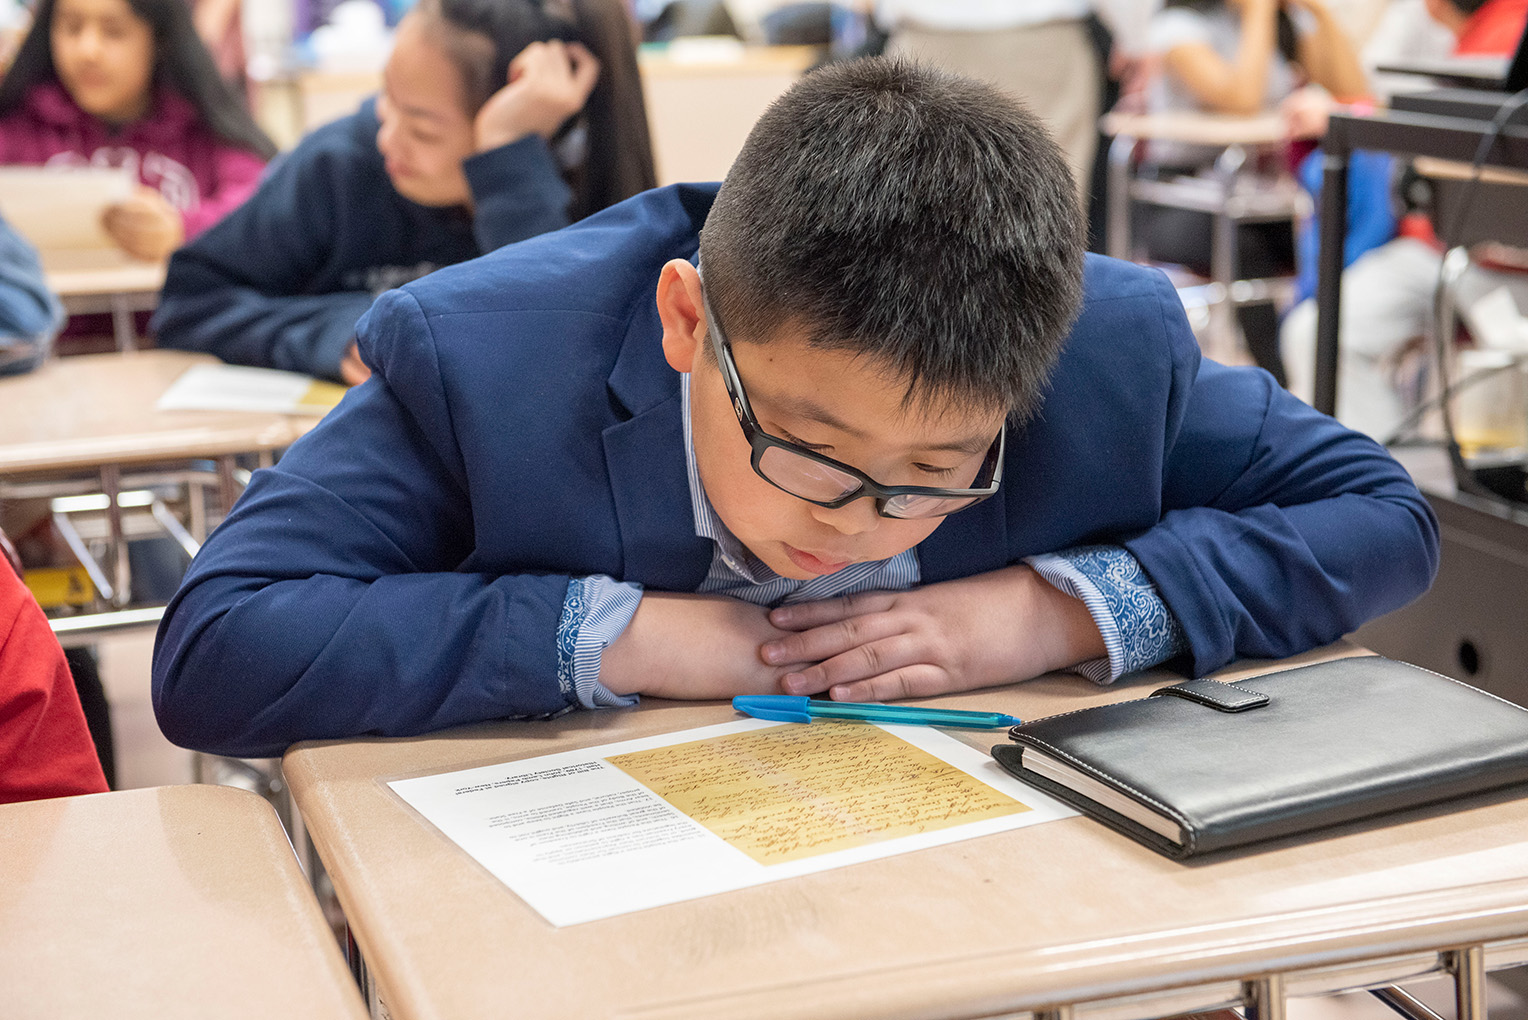 A kid reads text off a piece of paper while sitting at a desk